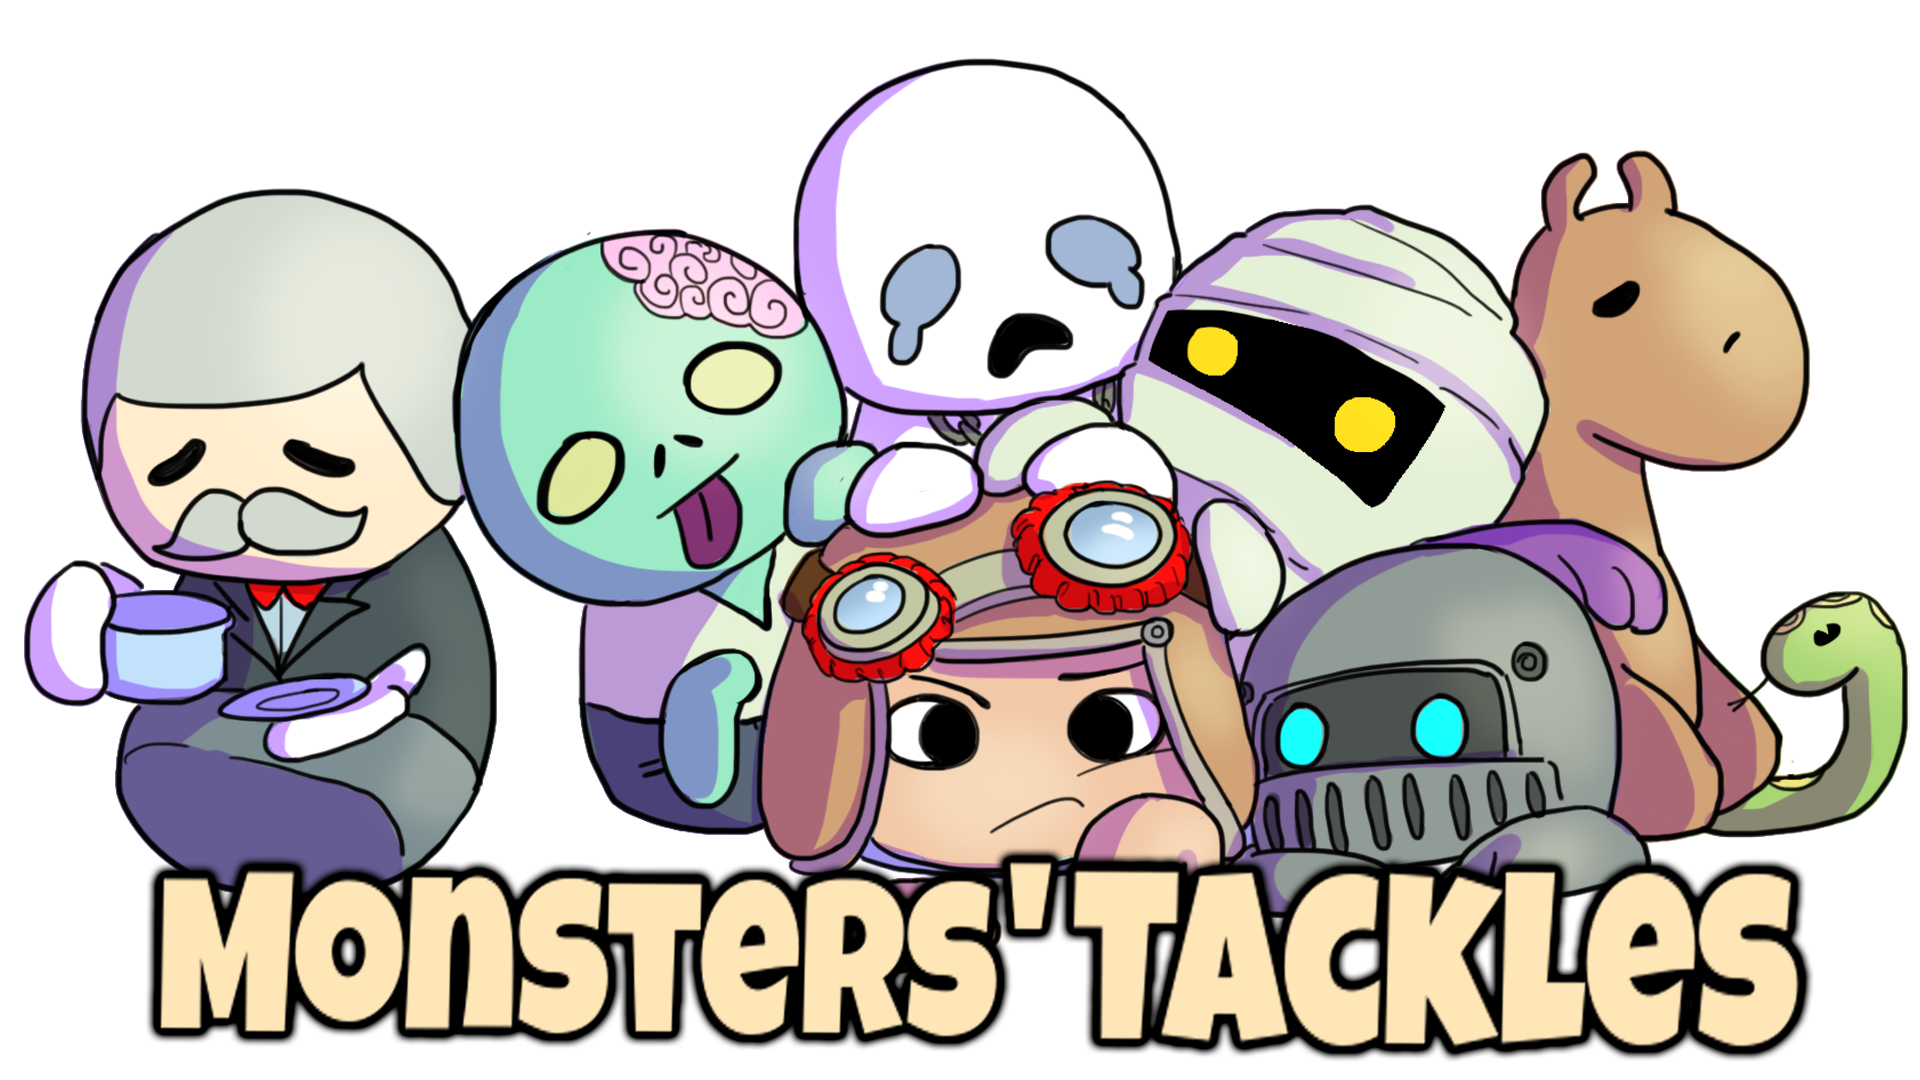 Monsters' Tackles